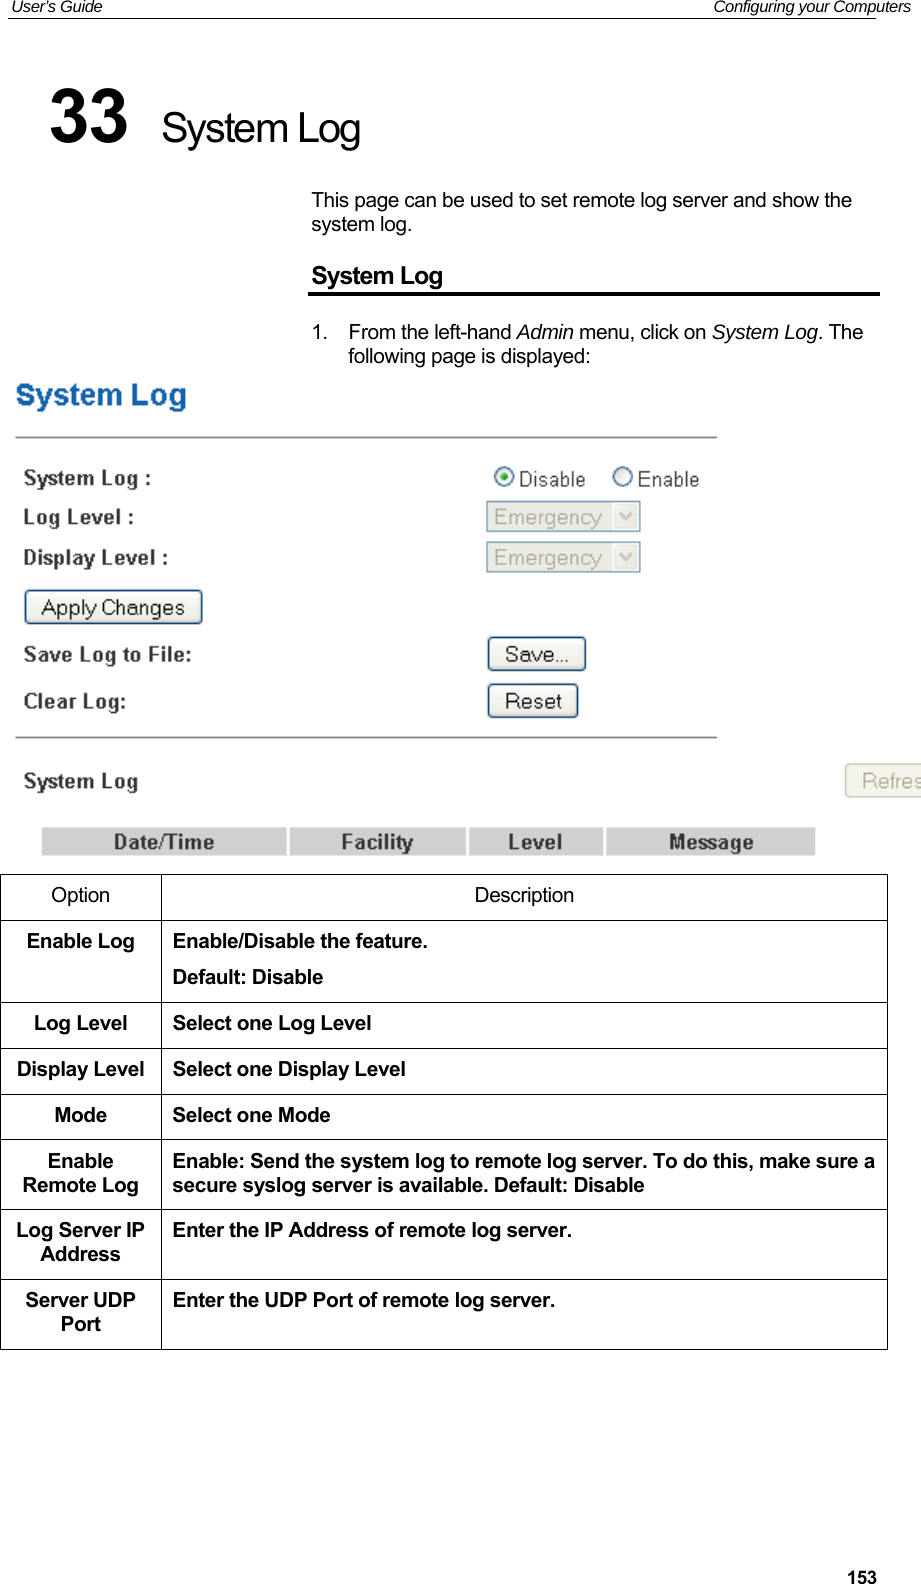 User’s Guide   Configuring your Computers  15333  System Log This page can be used to set remote log server and show the system log. System Log 1.  From the left-hand Admin menu, click on System Log. The following page is displayed:  Option  Description Enable Log  Enable/Disable the feature. Default: Disable Log Level  Select one Log Level Display Level  Select one Display Level Mode  Select one Mode Enable Remote Log Enable: Send the system log to remote log server. To do this, make sure a secure syslog server is available. Default: Disable Log Server IP Address Enter the IP Address of remote log server. Server UDP Port Enter the UDP Port of remote log server.     